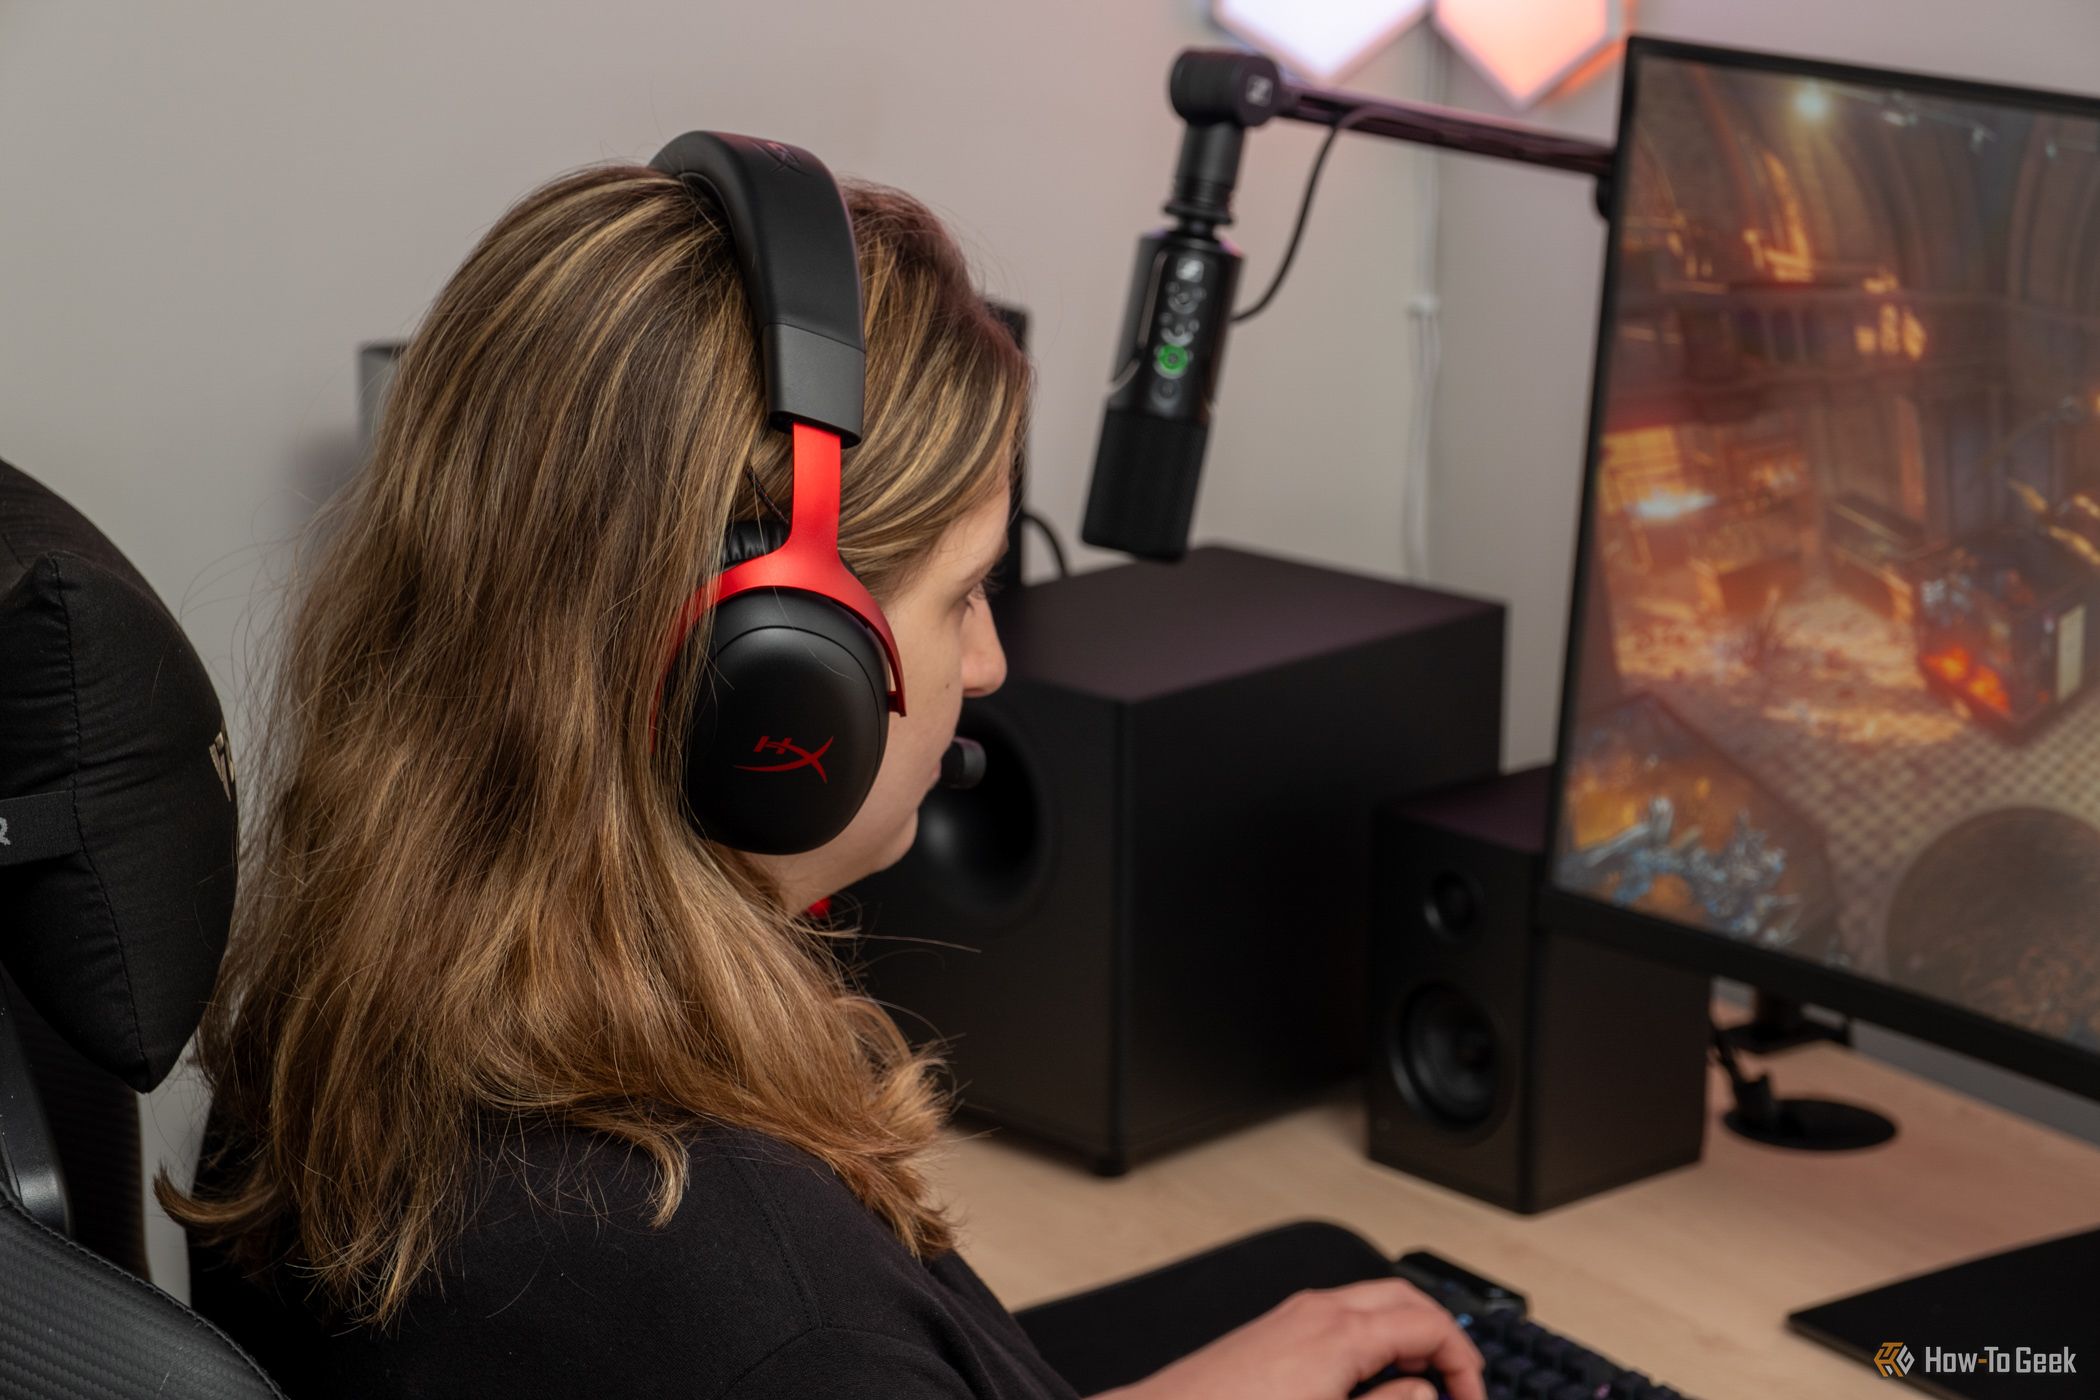 HyperX Cloud III Wireless Headset being used to game